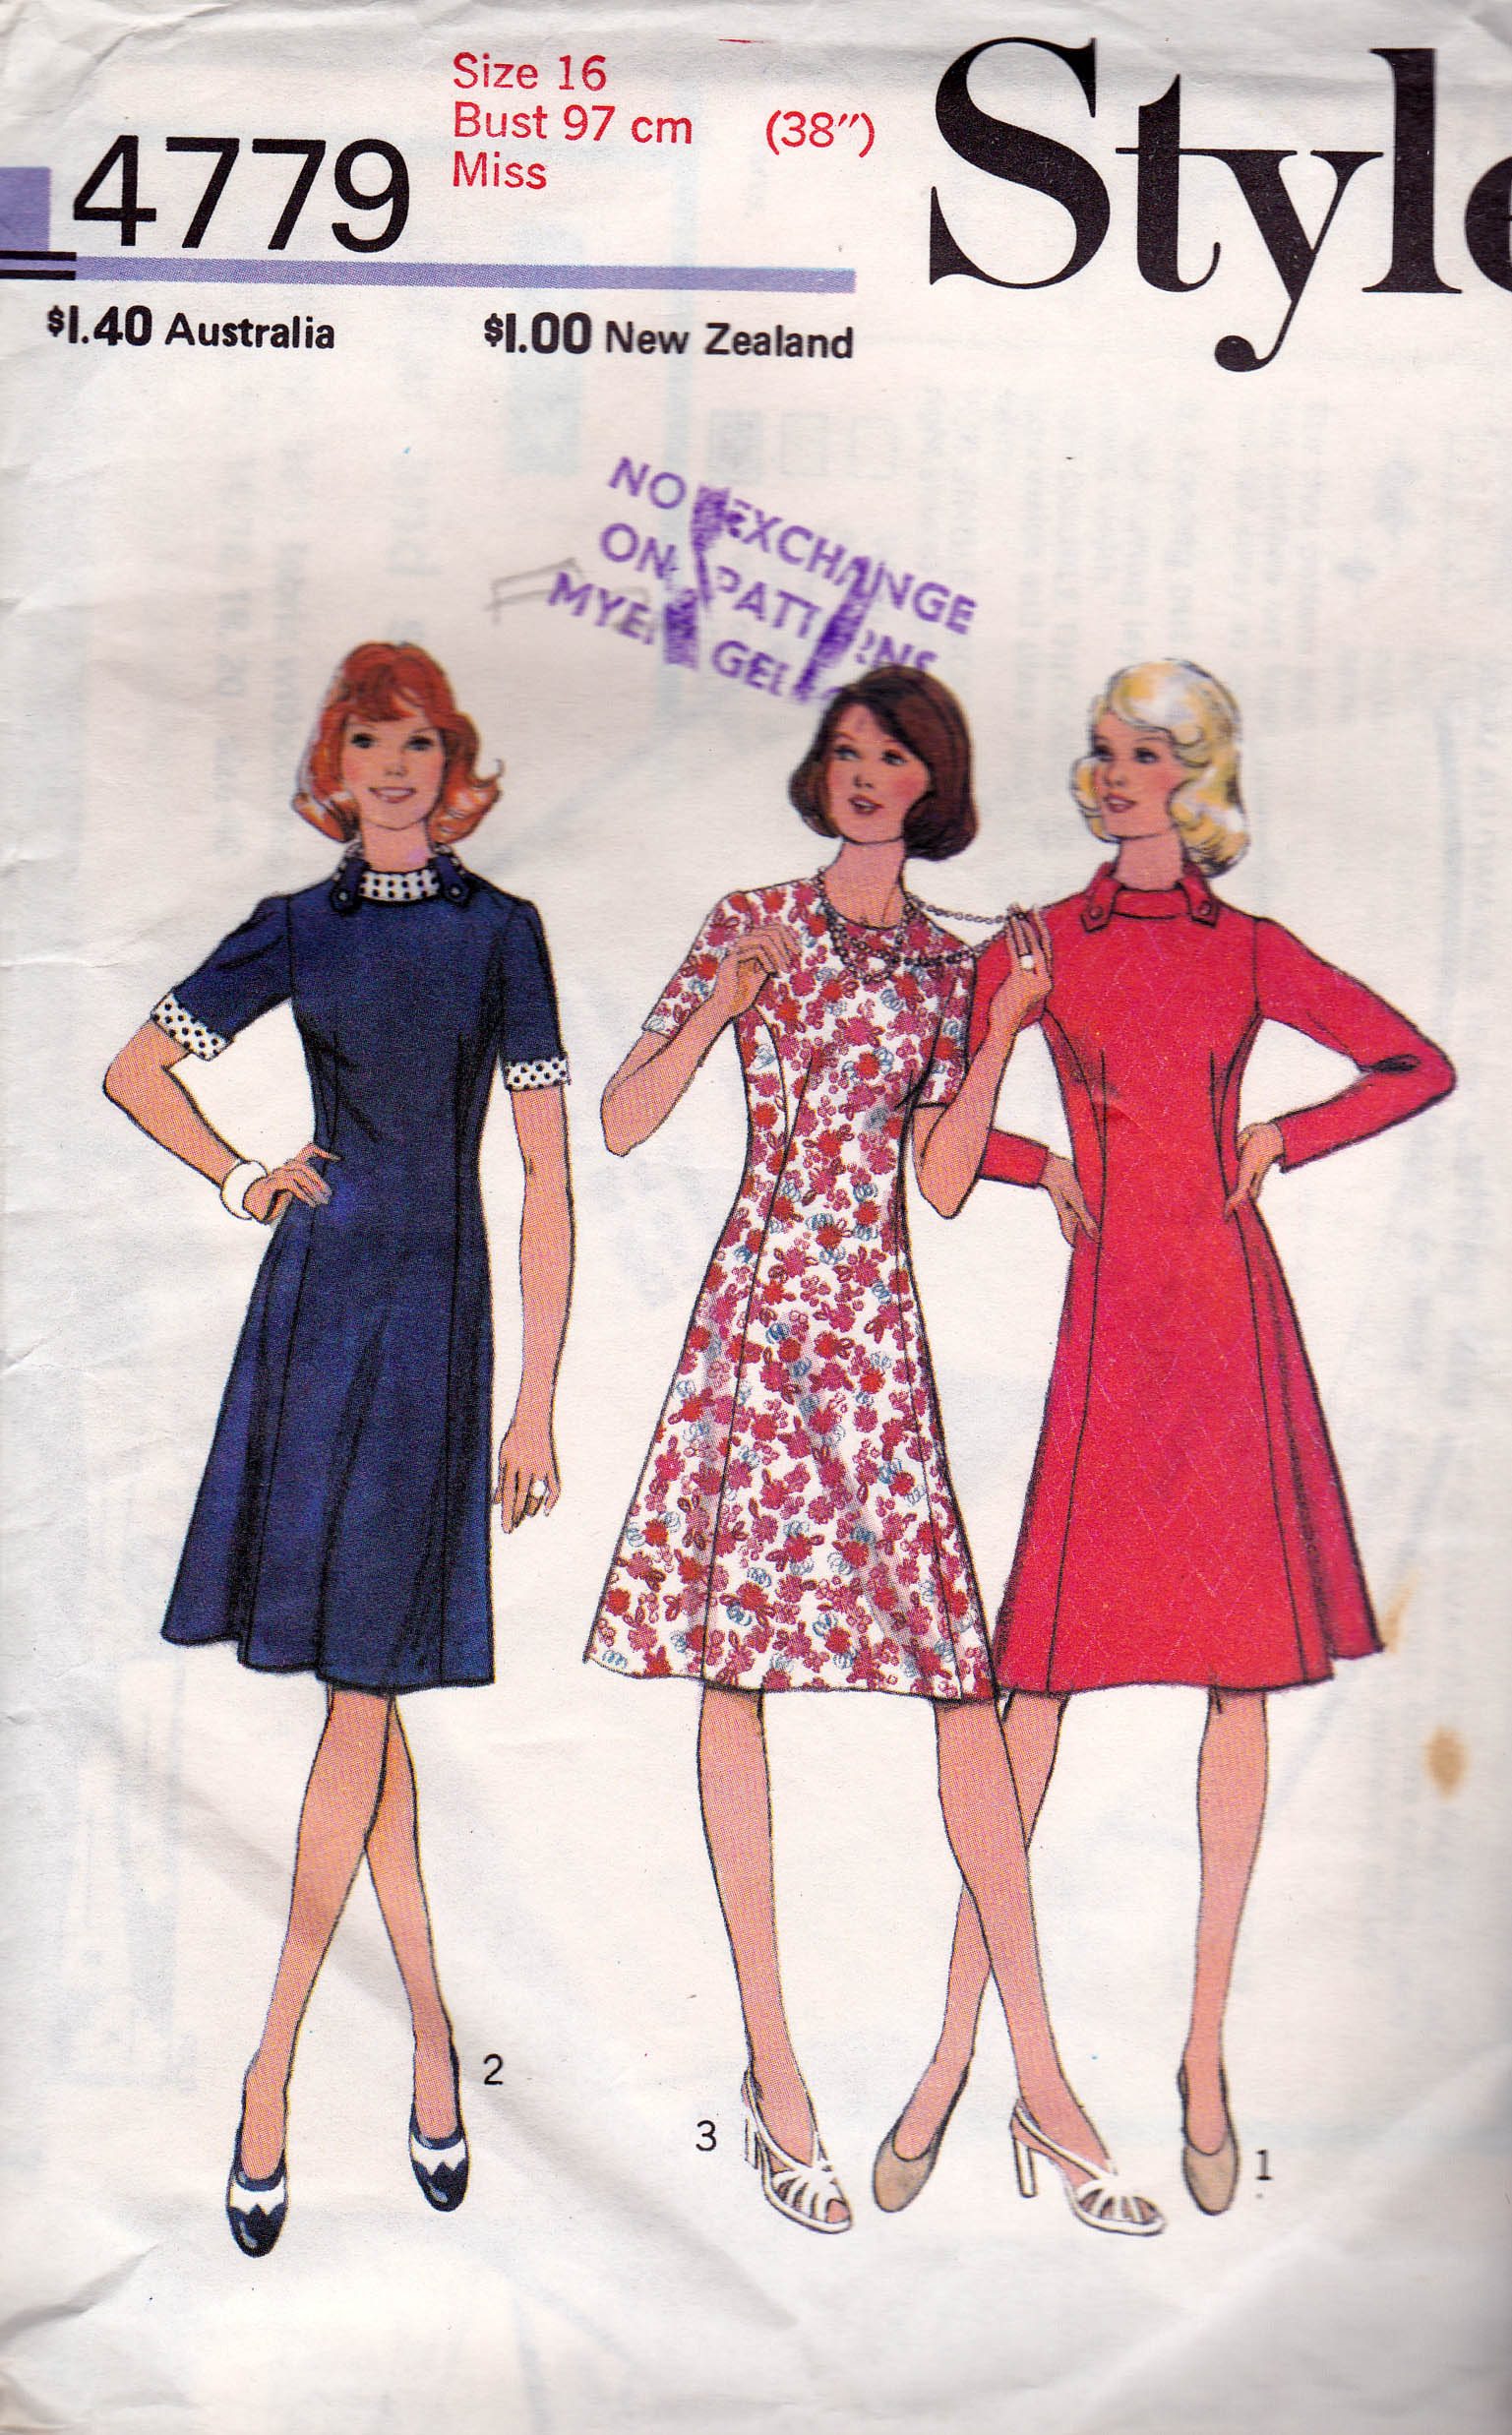 sewing pattern dating .35 cents per minute